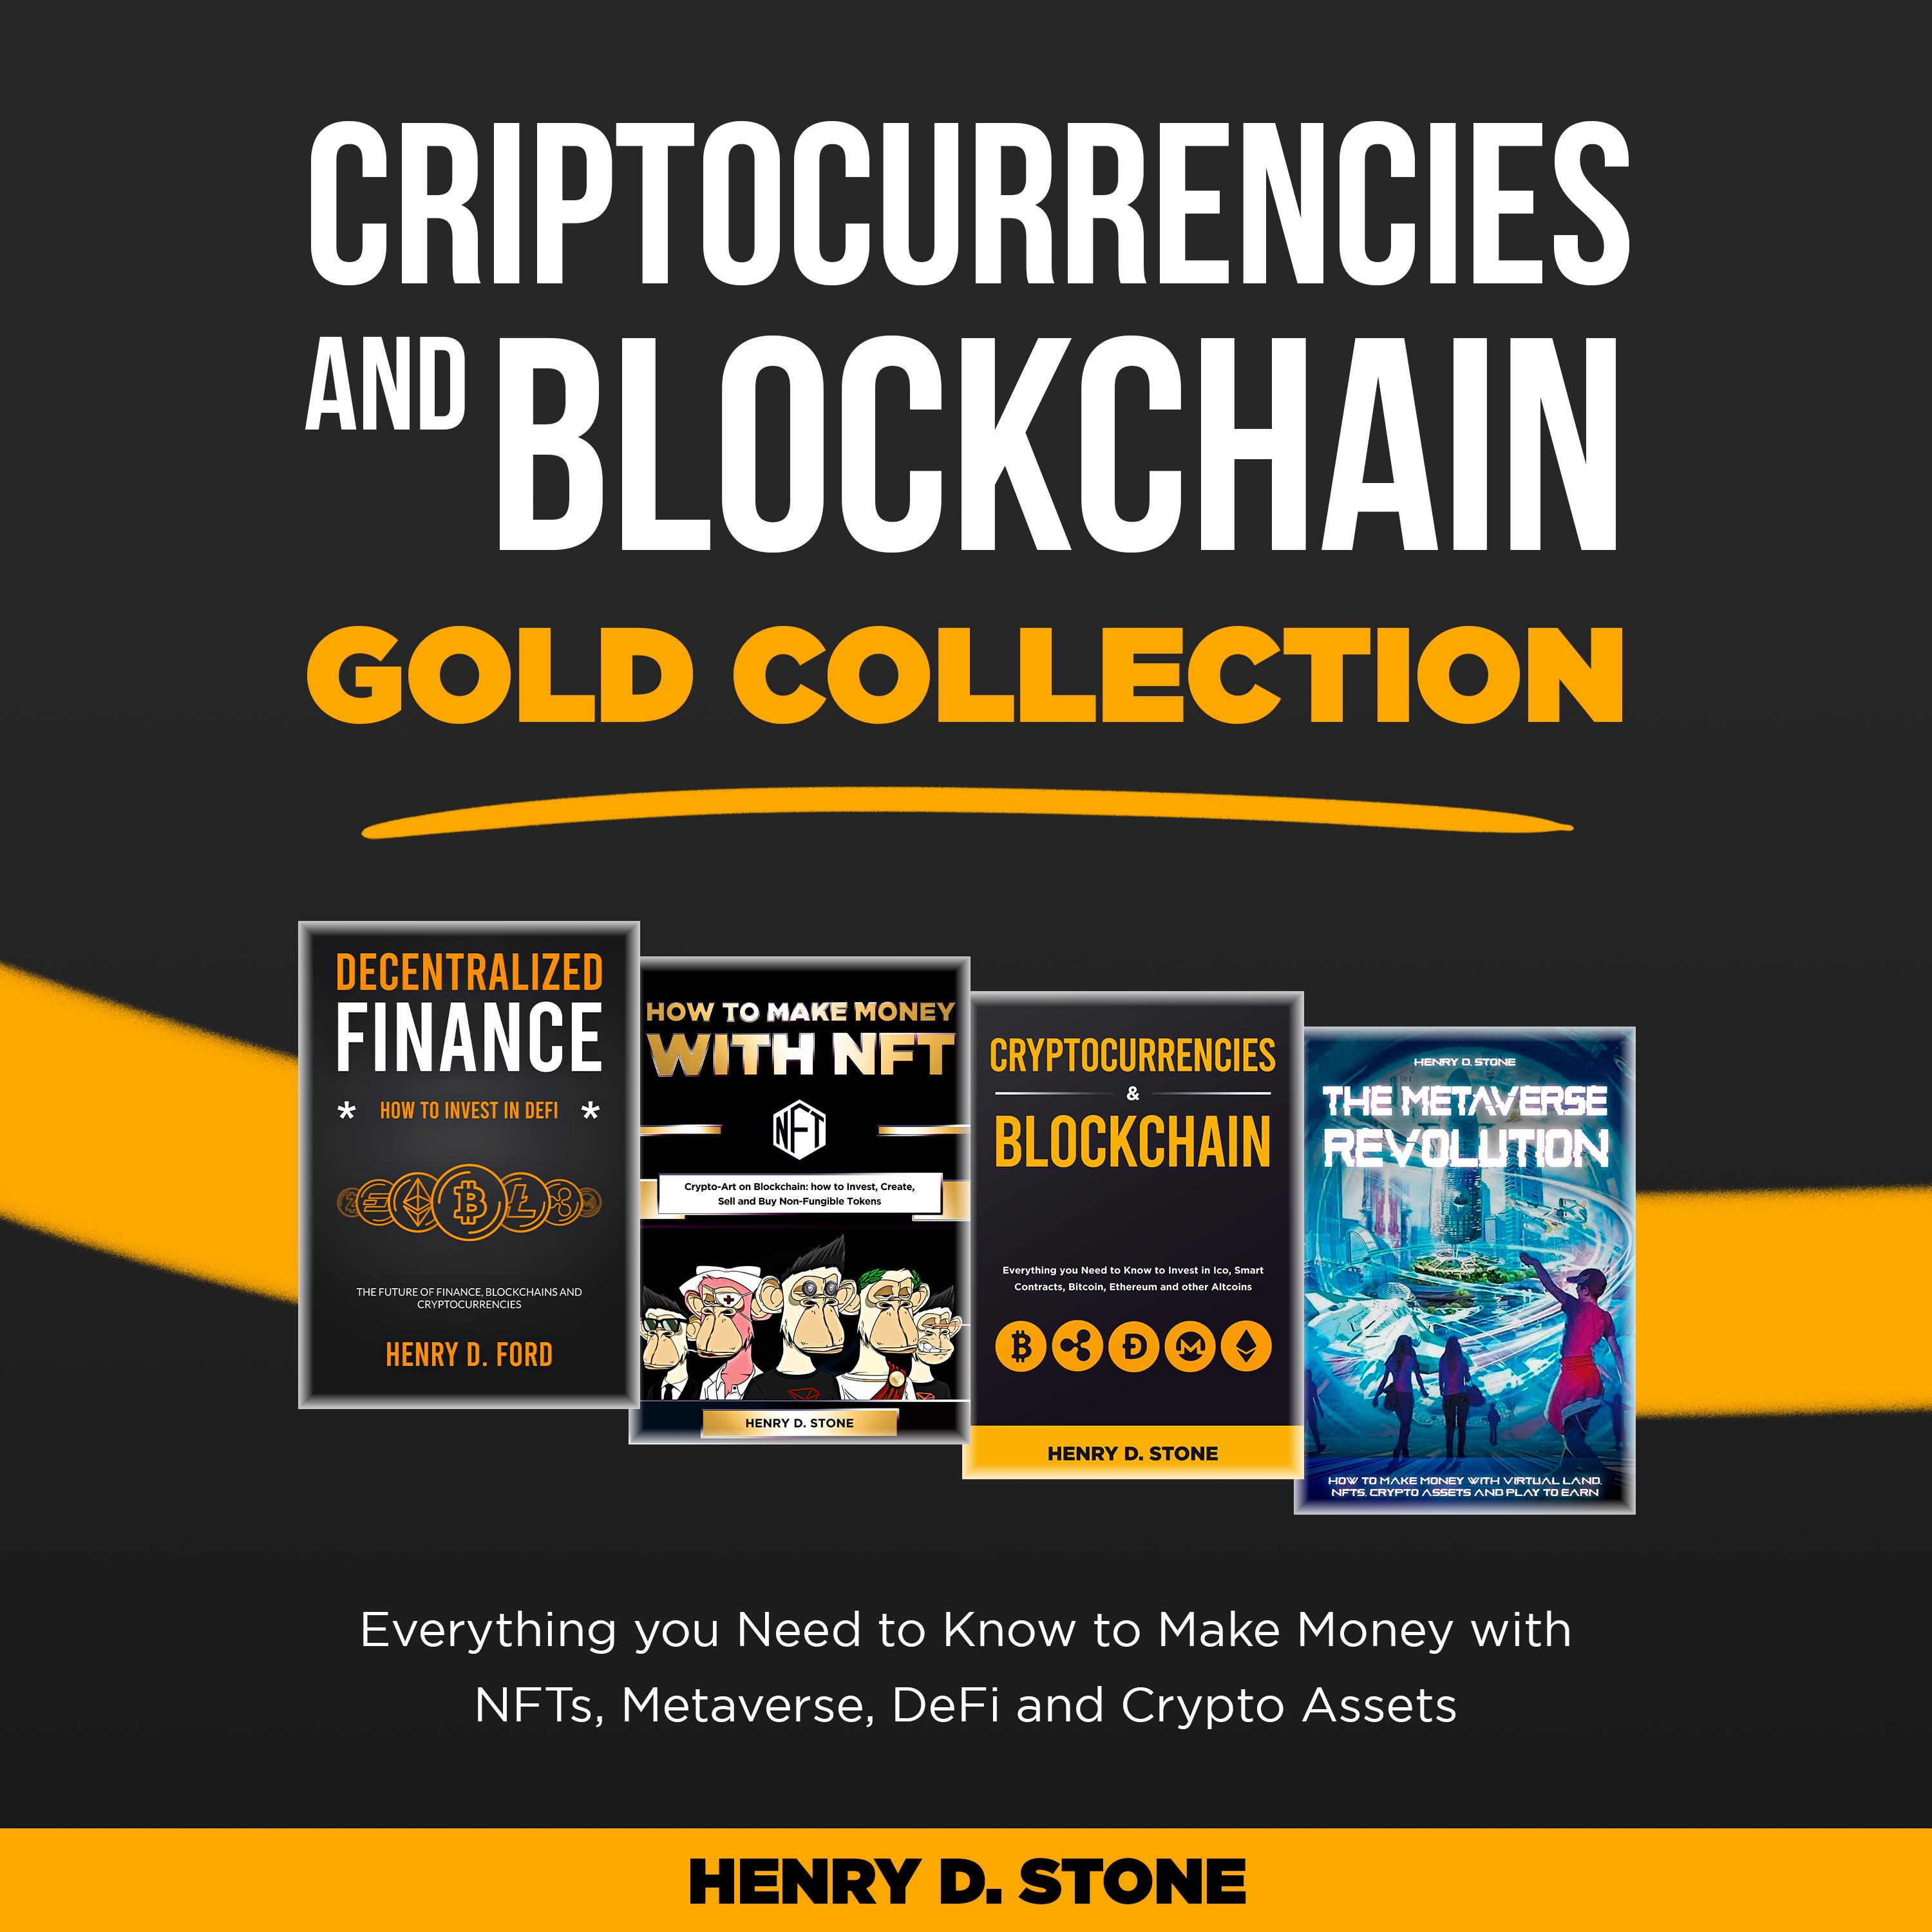 Cryptocurrencies and Blockchain Gold Collection